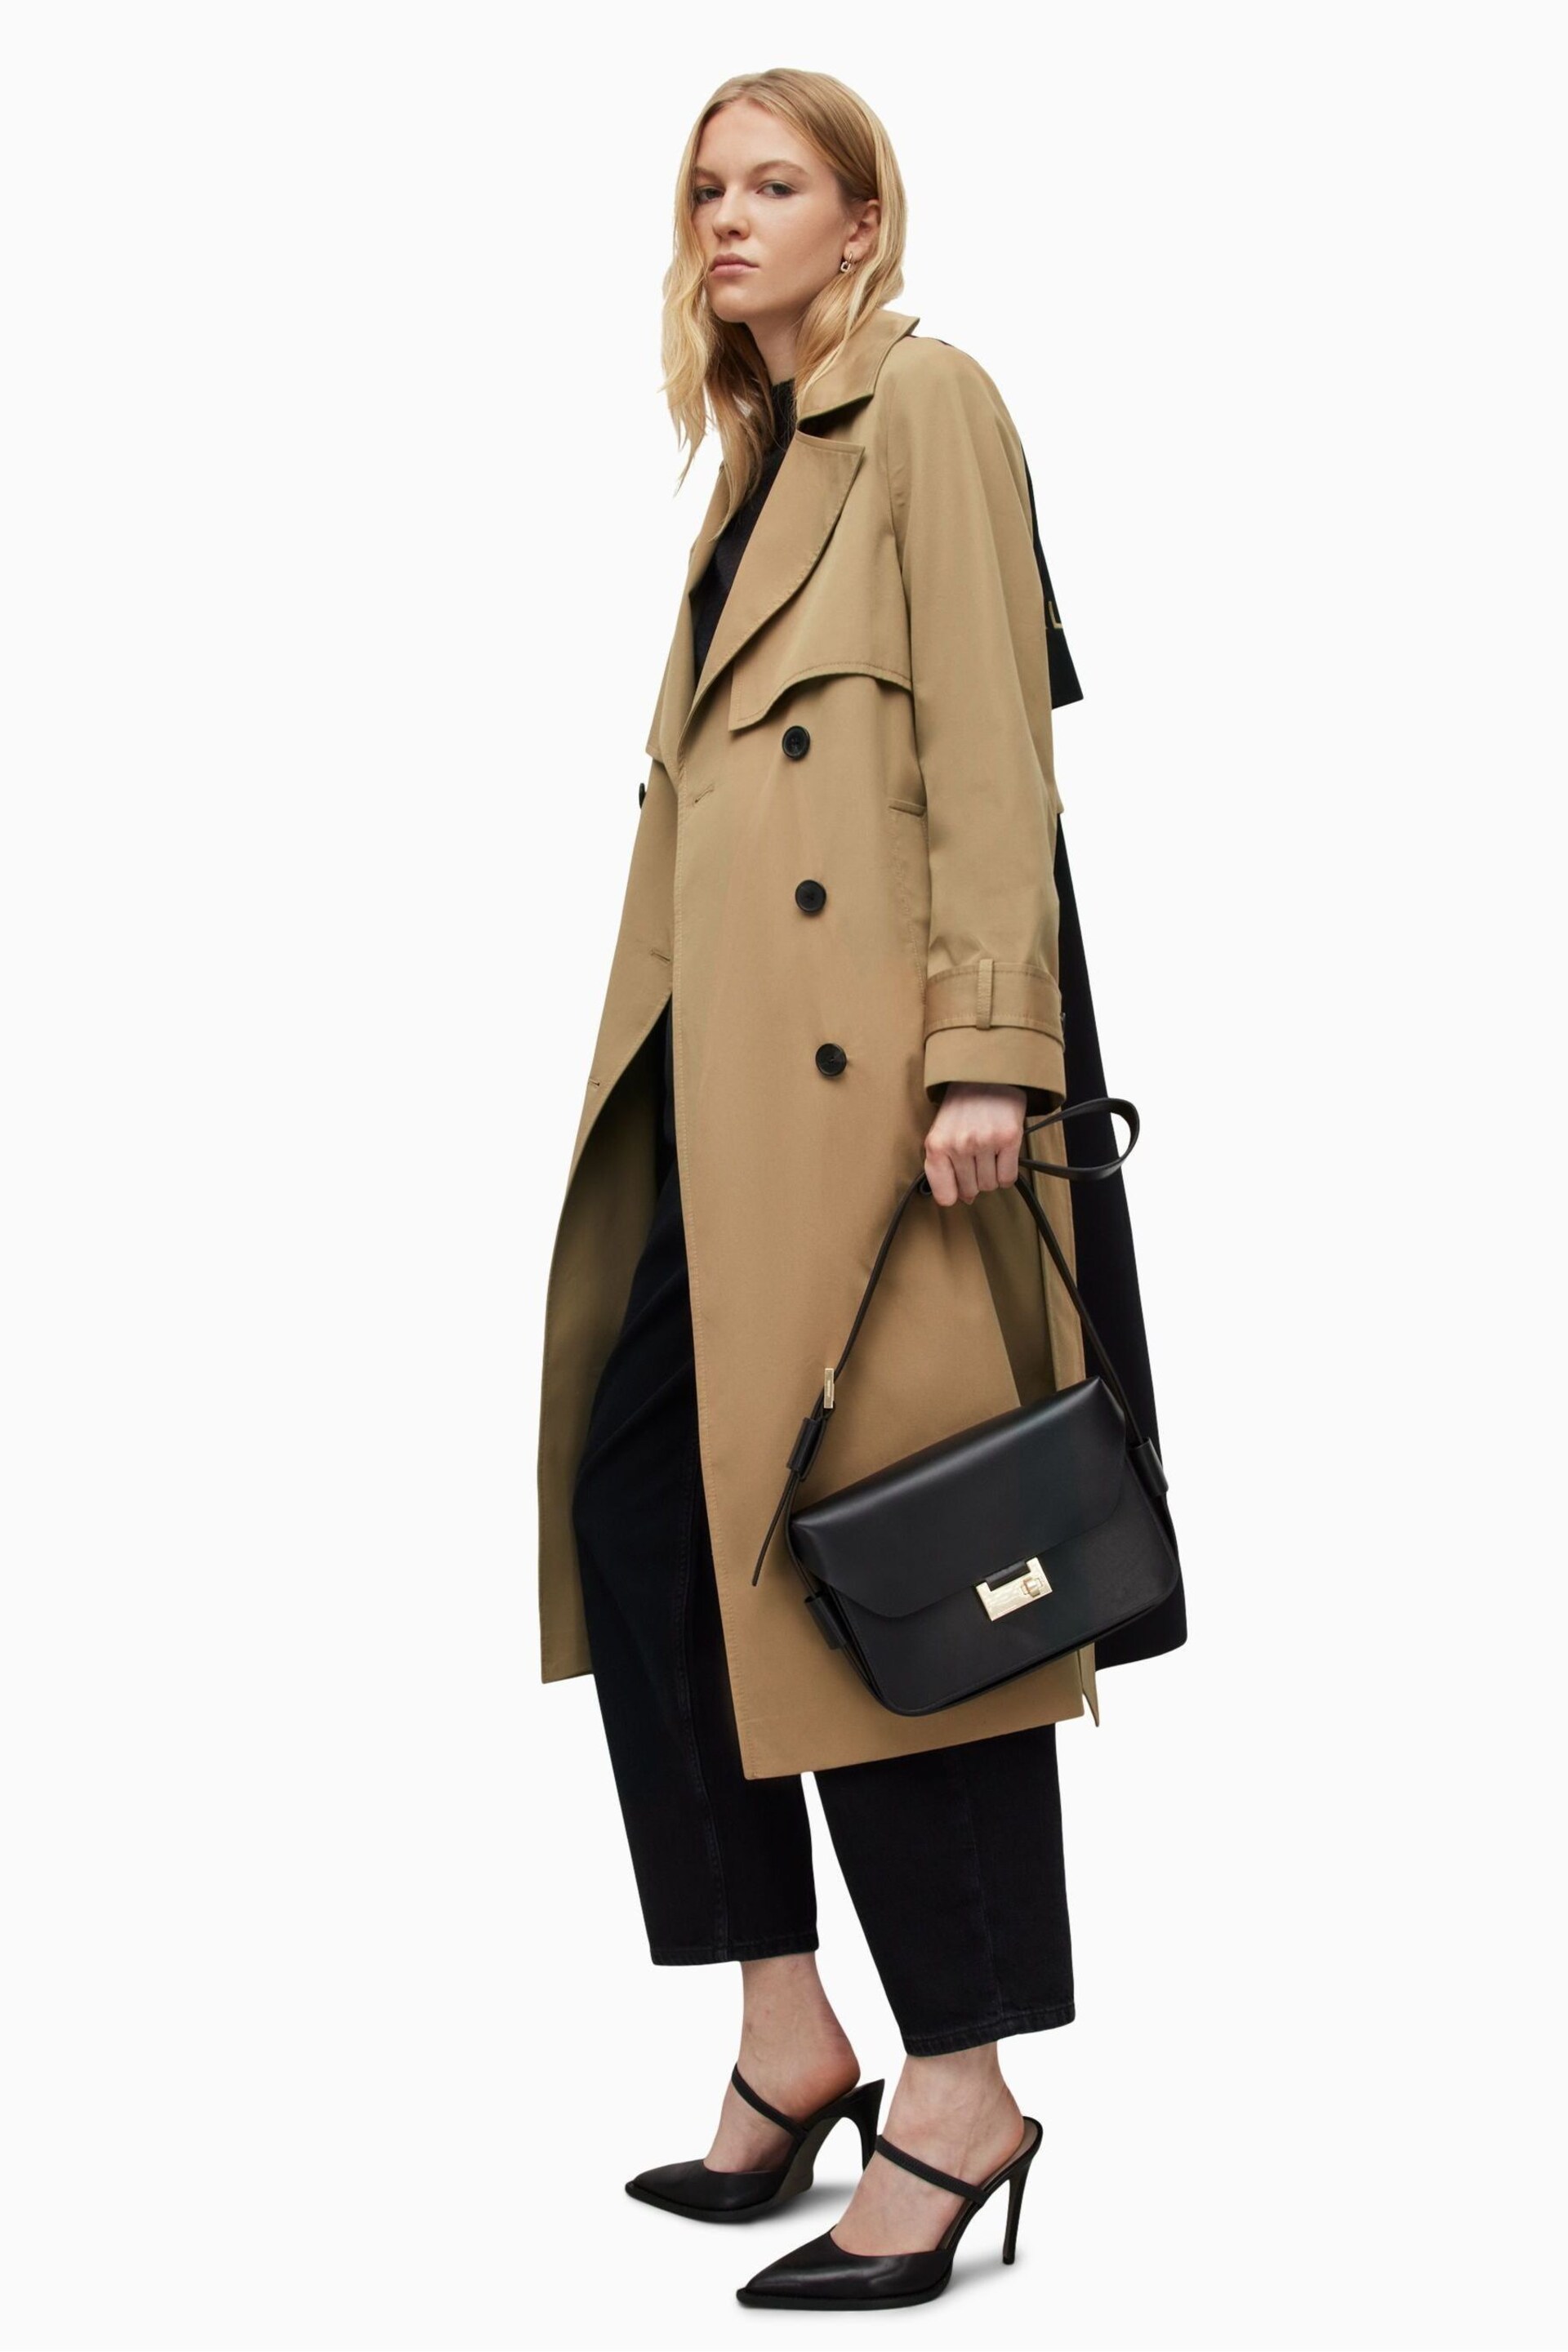 AllSaints Black Mixie Trench Coat - Image 3 of 8